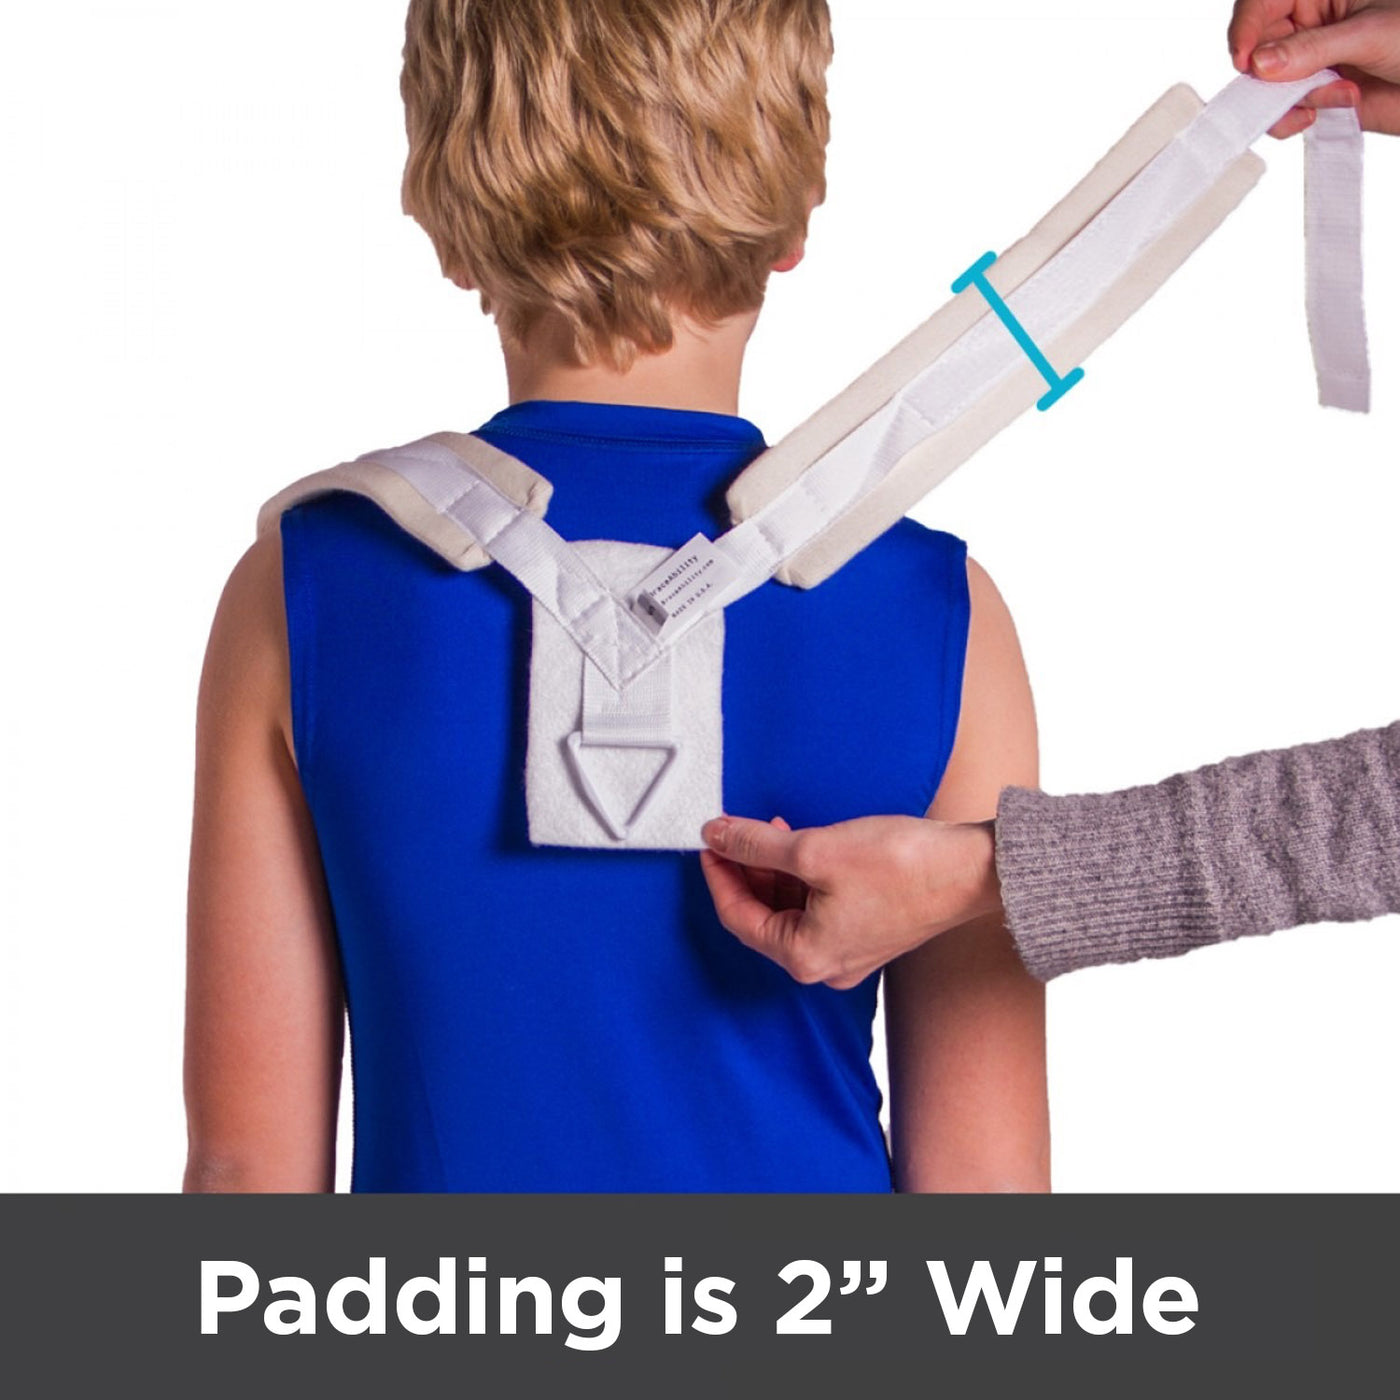 Padded straps on this clavicle fracture brace are 2 inches wide